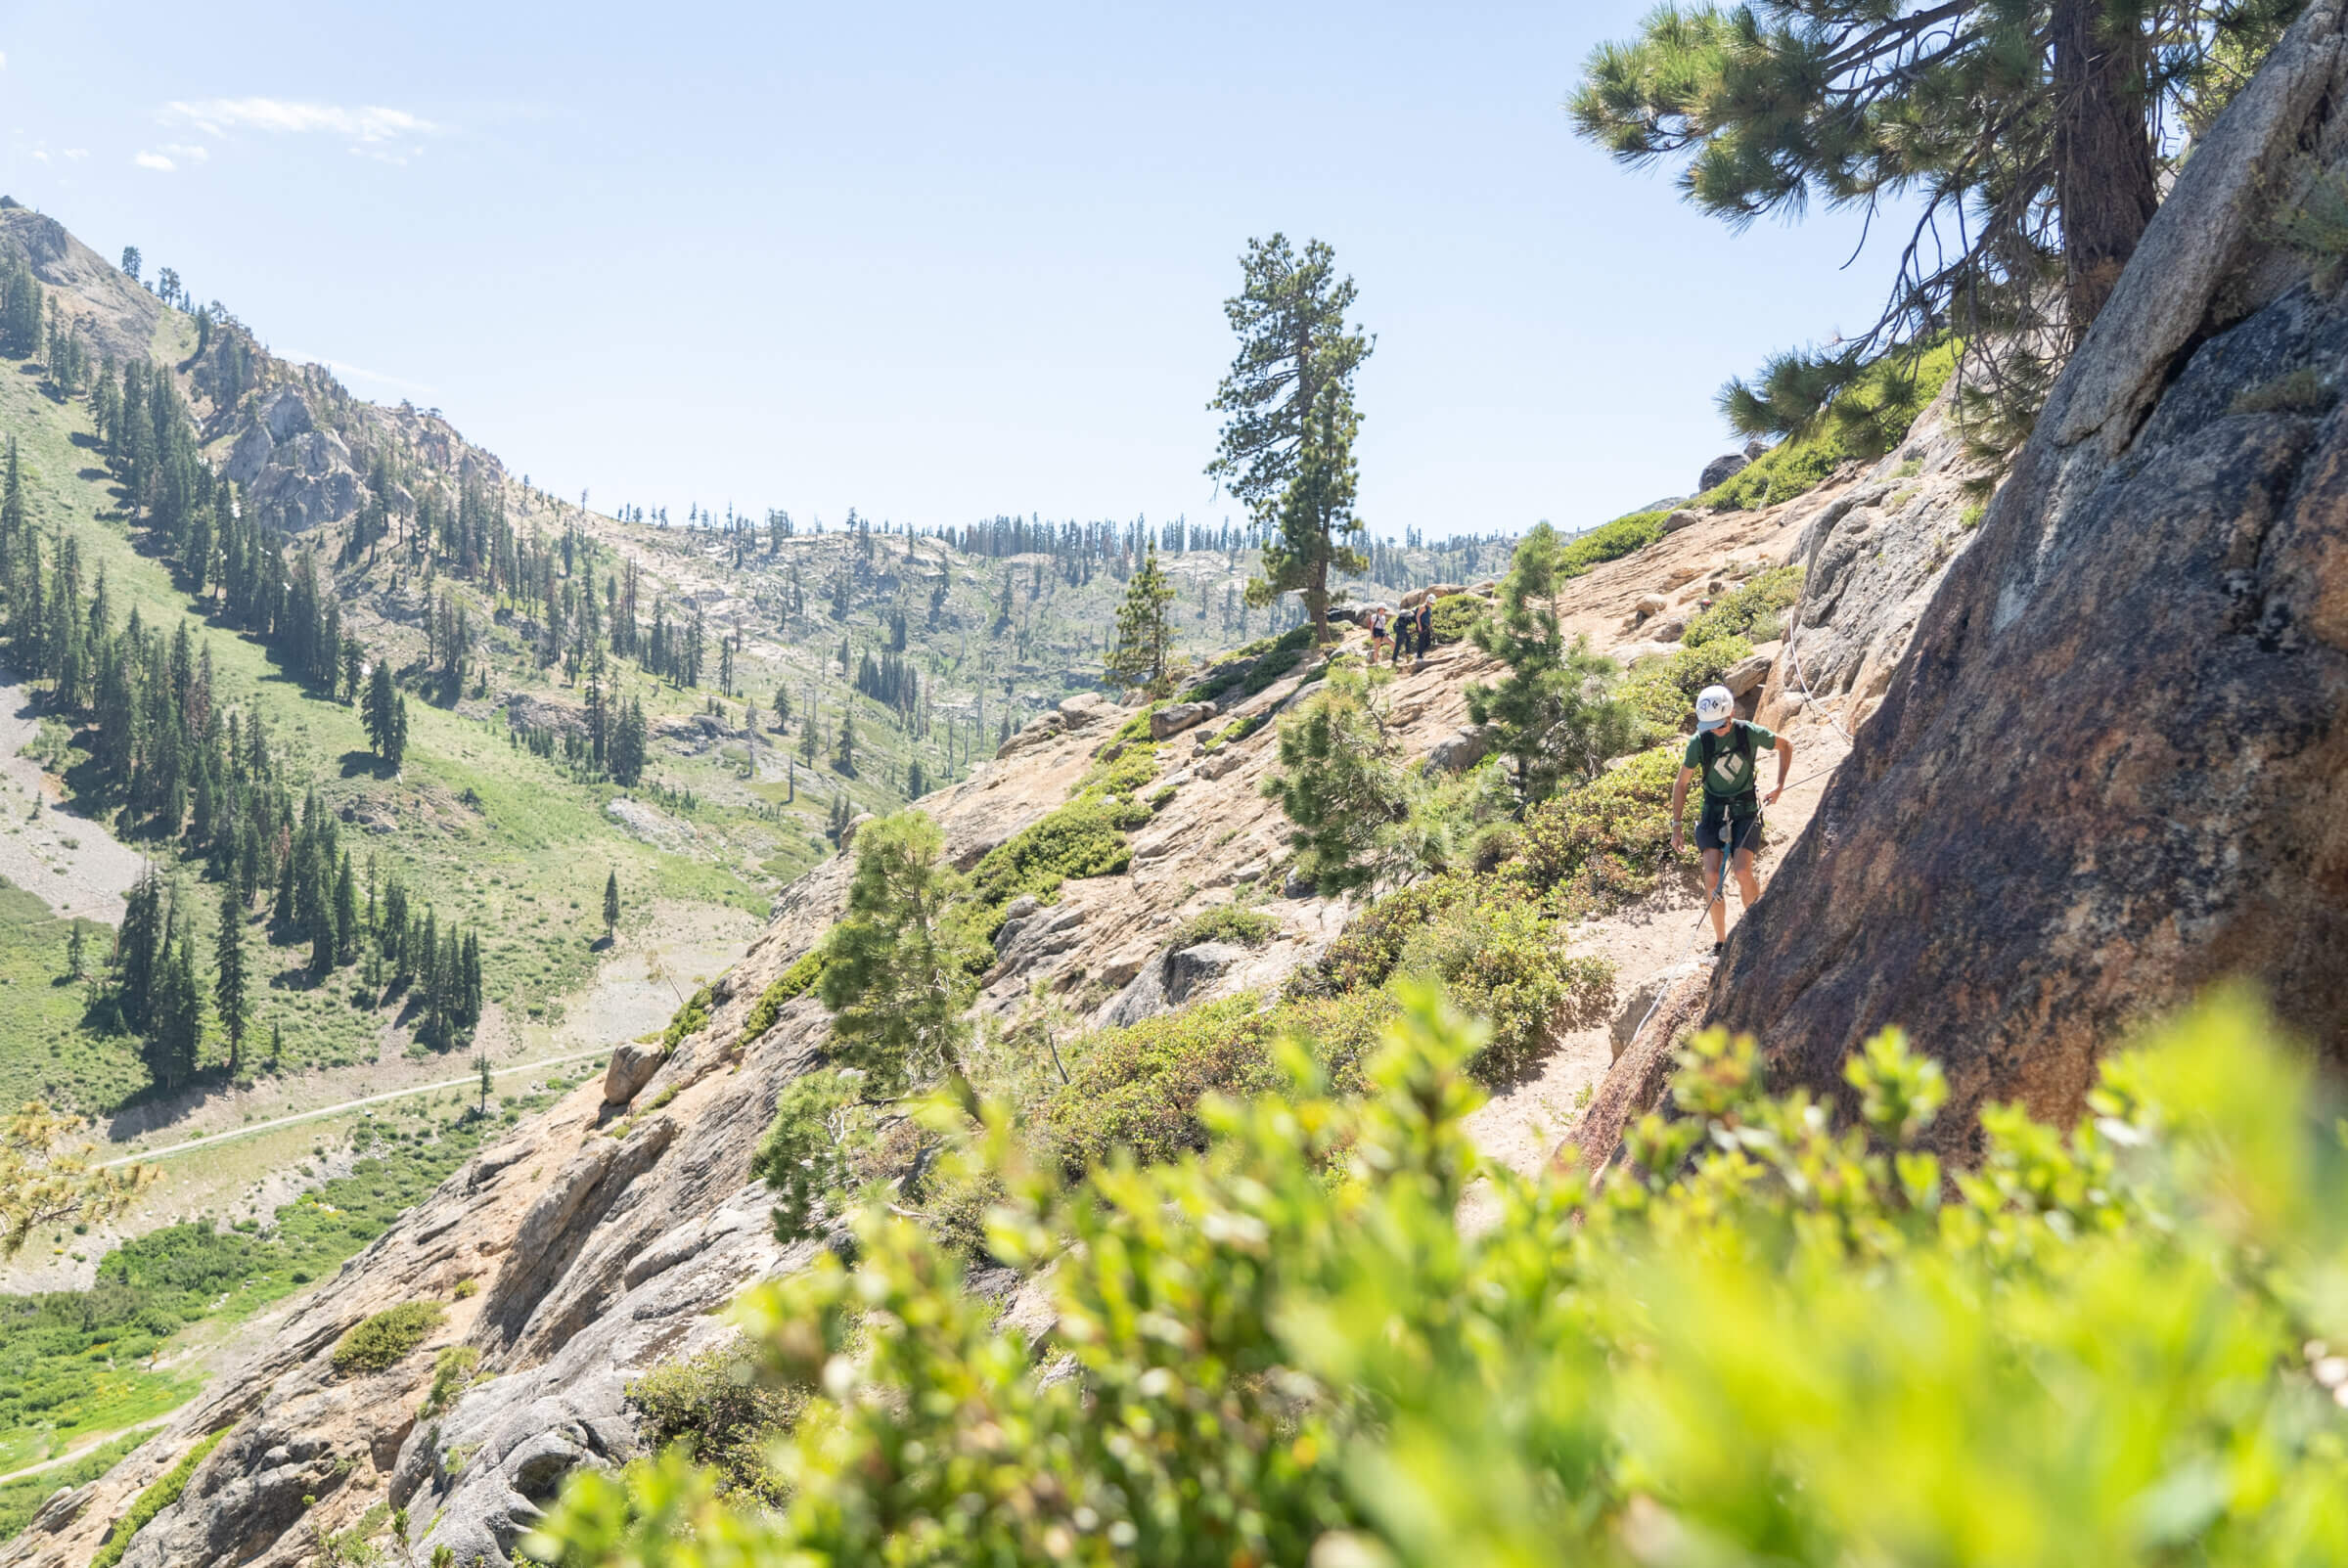 A climber on a traverse climbing the Tahoe Via Ferrata during the summer. One of the best Lake Tahoe adventures!